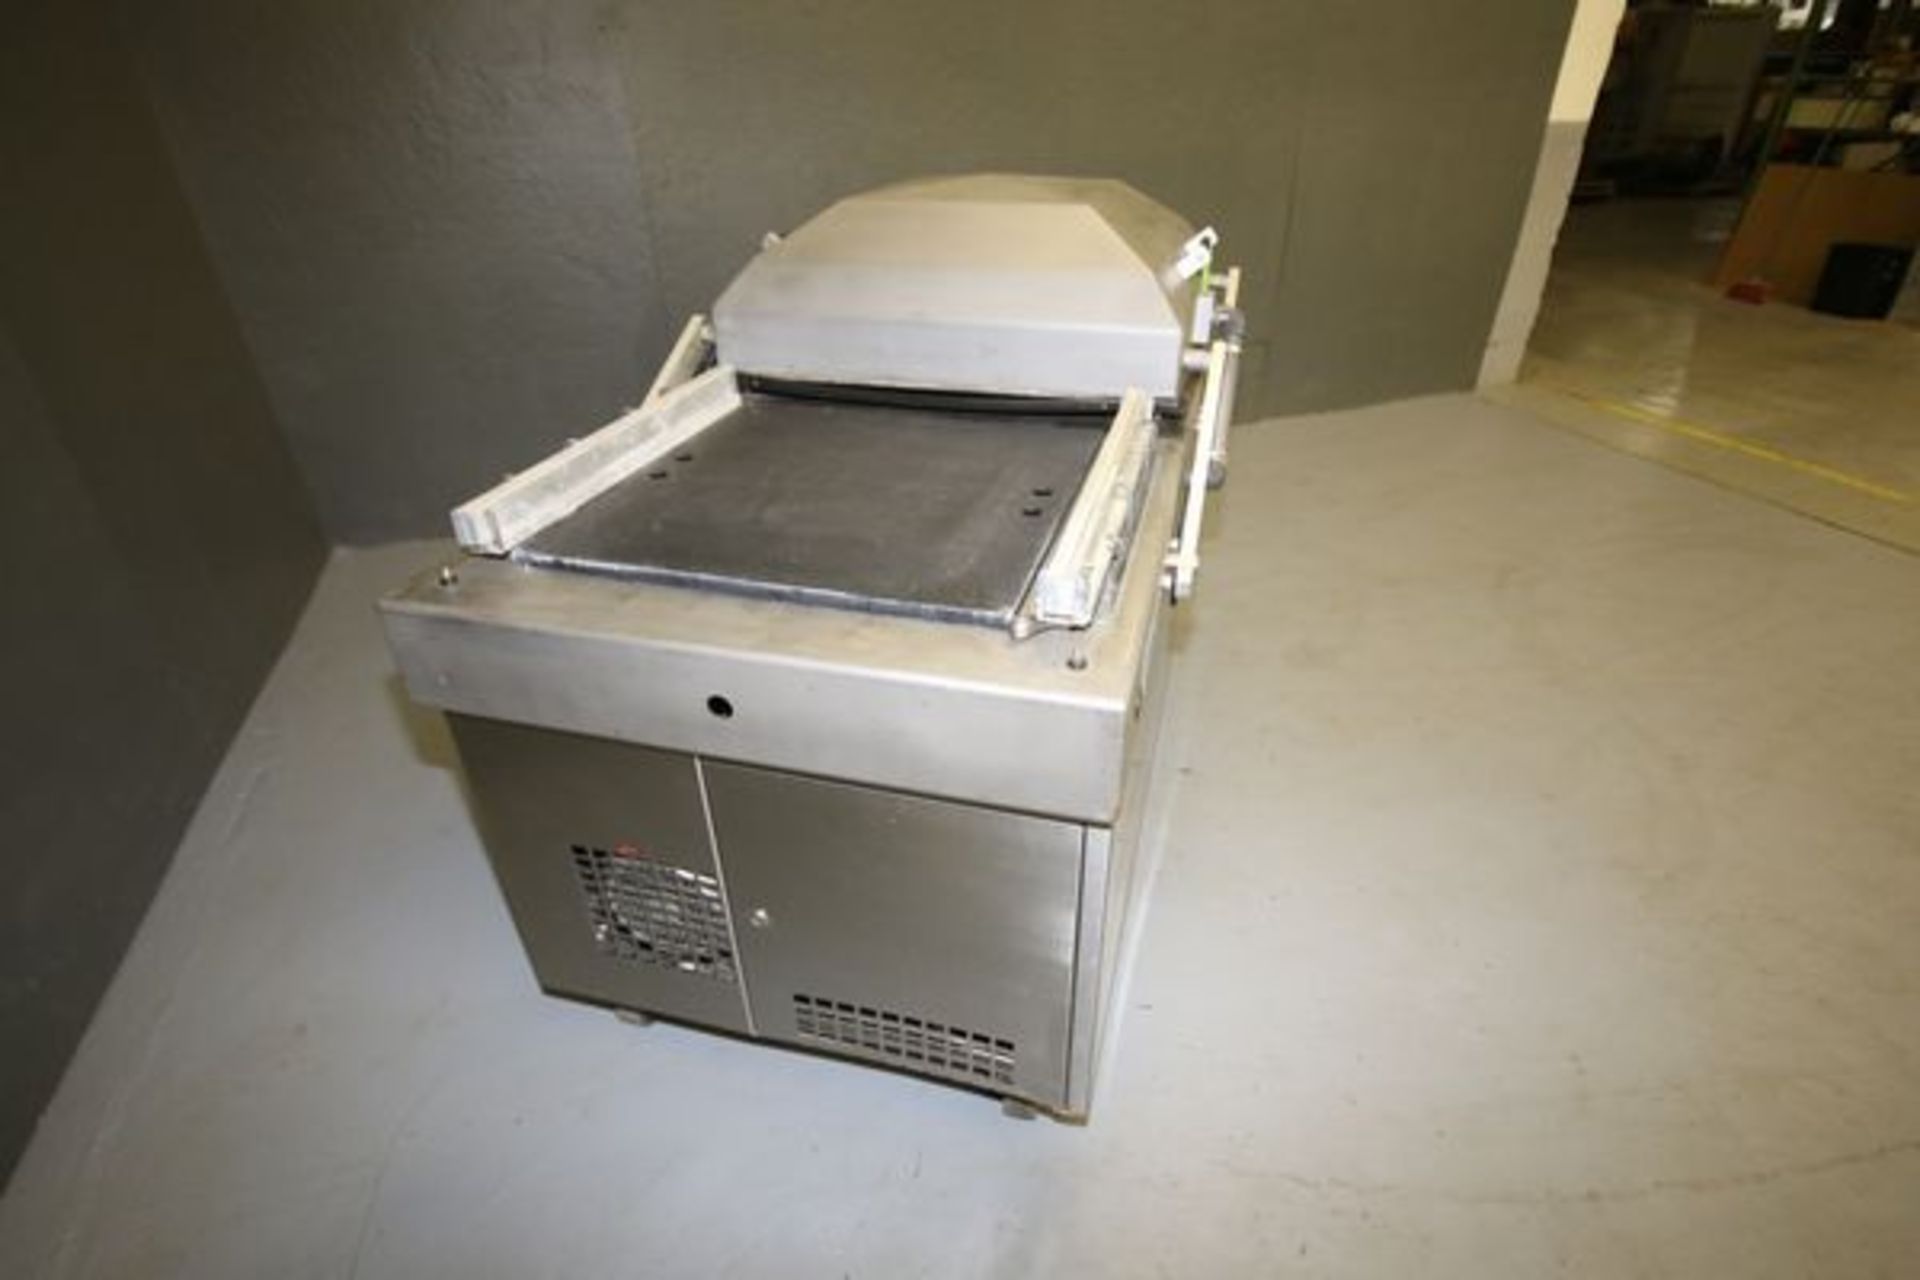 Smith SuperVac Dual Vacuum Sealer, Type GK290 with Seal Platform Dimension: Aprox. 24" x 24", 460 - Image 5 of 8